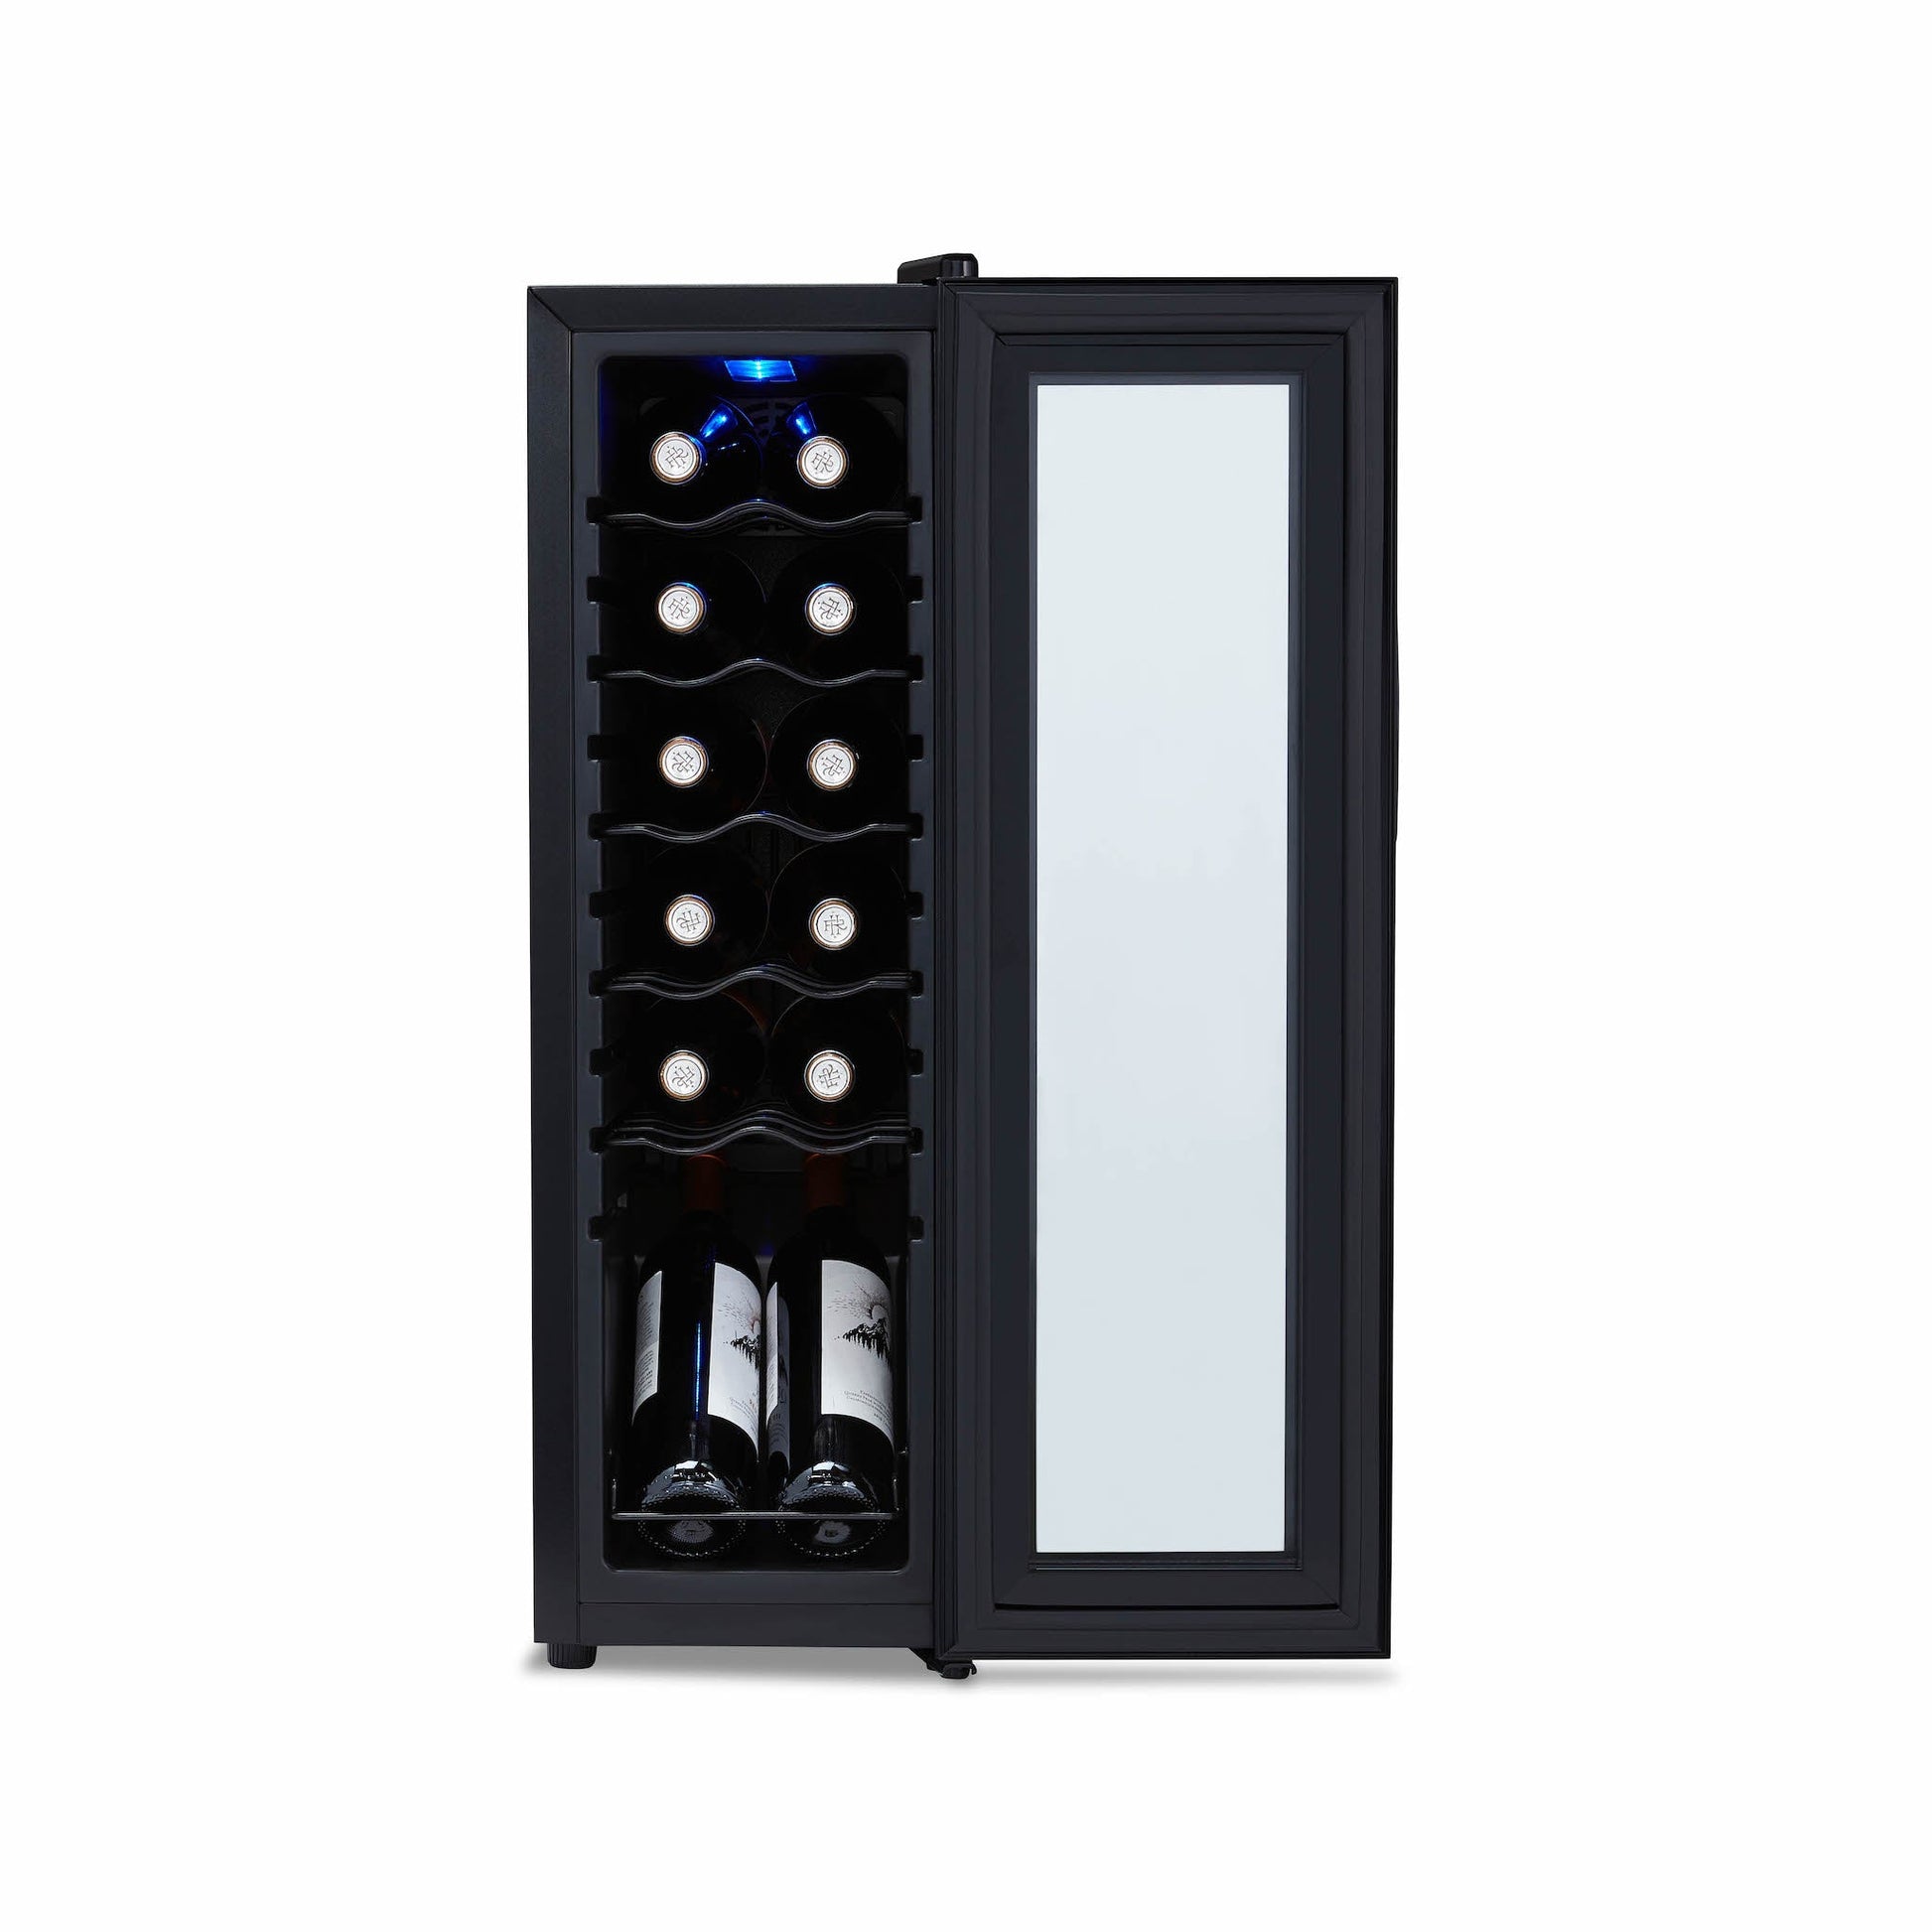 Newair® Shadow?? Series Wine Cooler Refrigerator 12 Bottle, Freestanding Mirrored Wine Fridge with Double-Layer Tempered Glass Door & Compressor Cooling for Reds, Whites, and Sparkling Wine, 41f-64f Digital Temperature Control